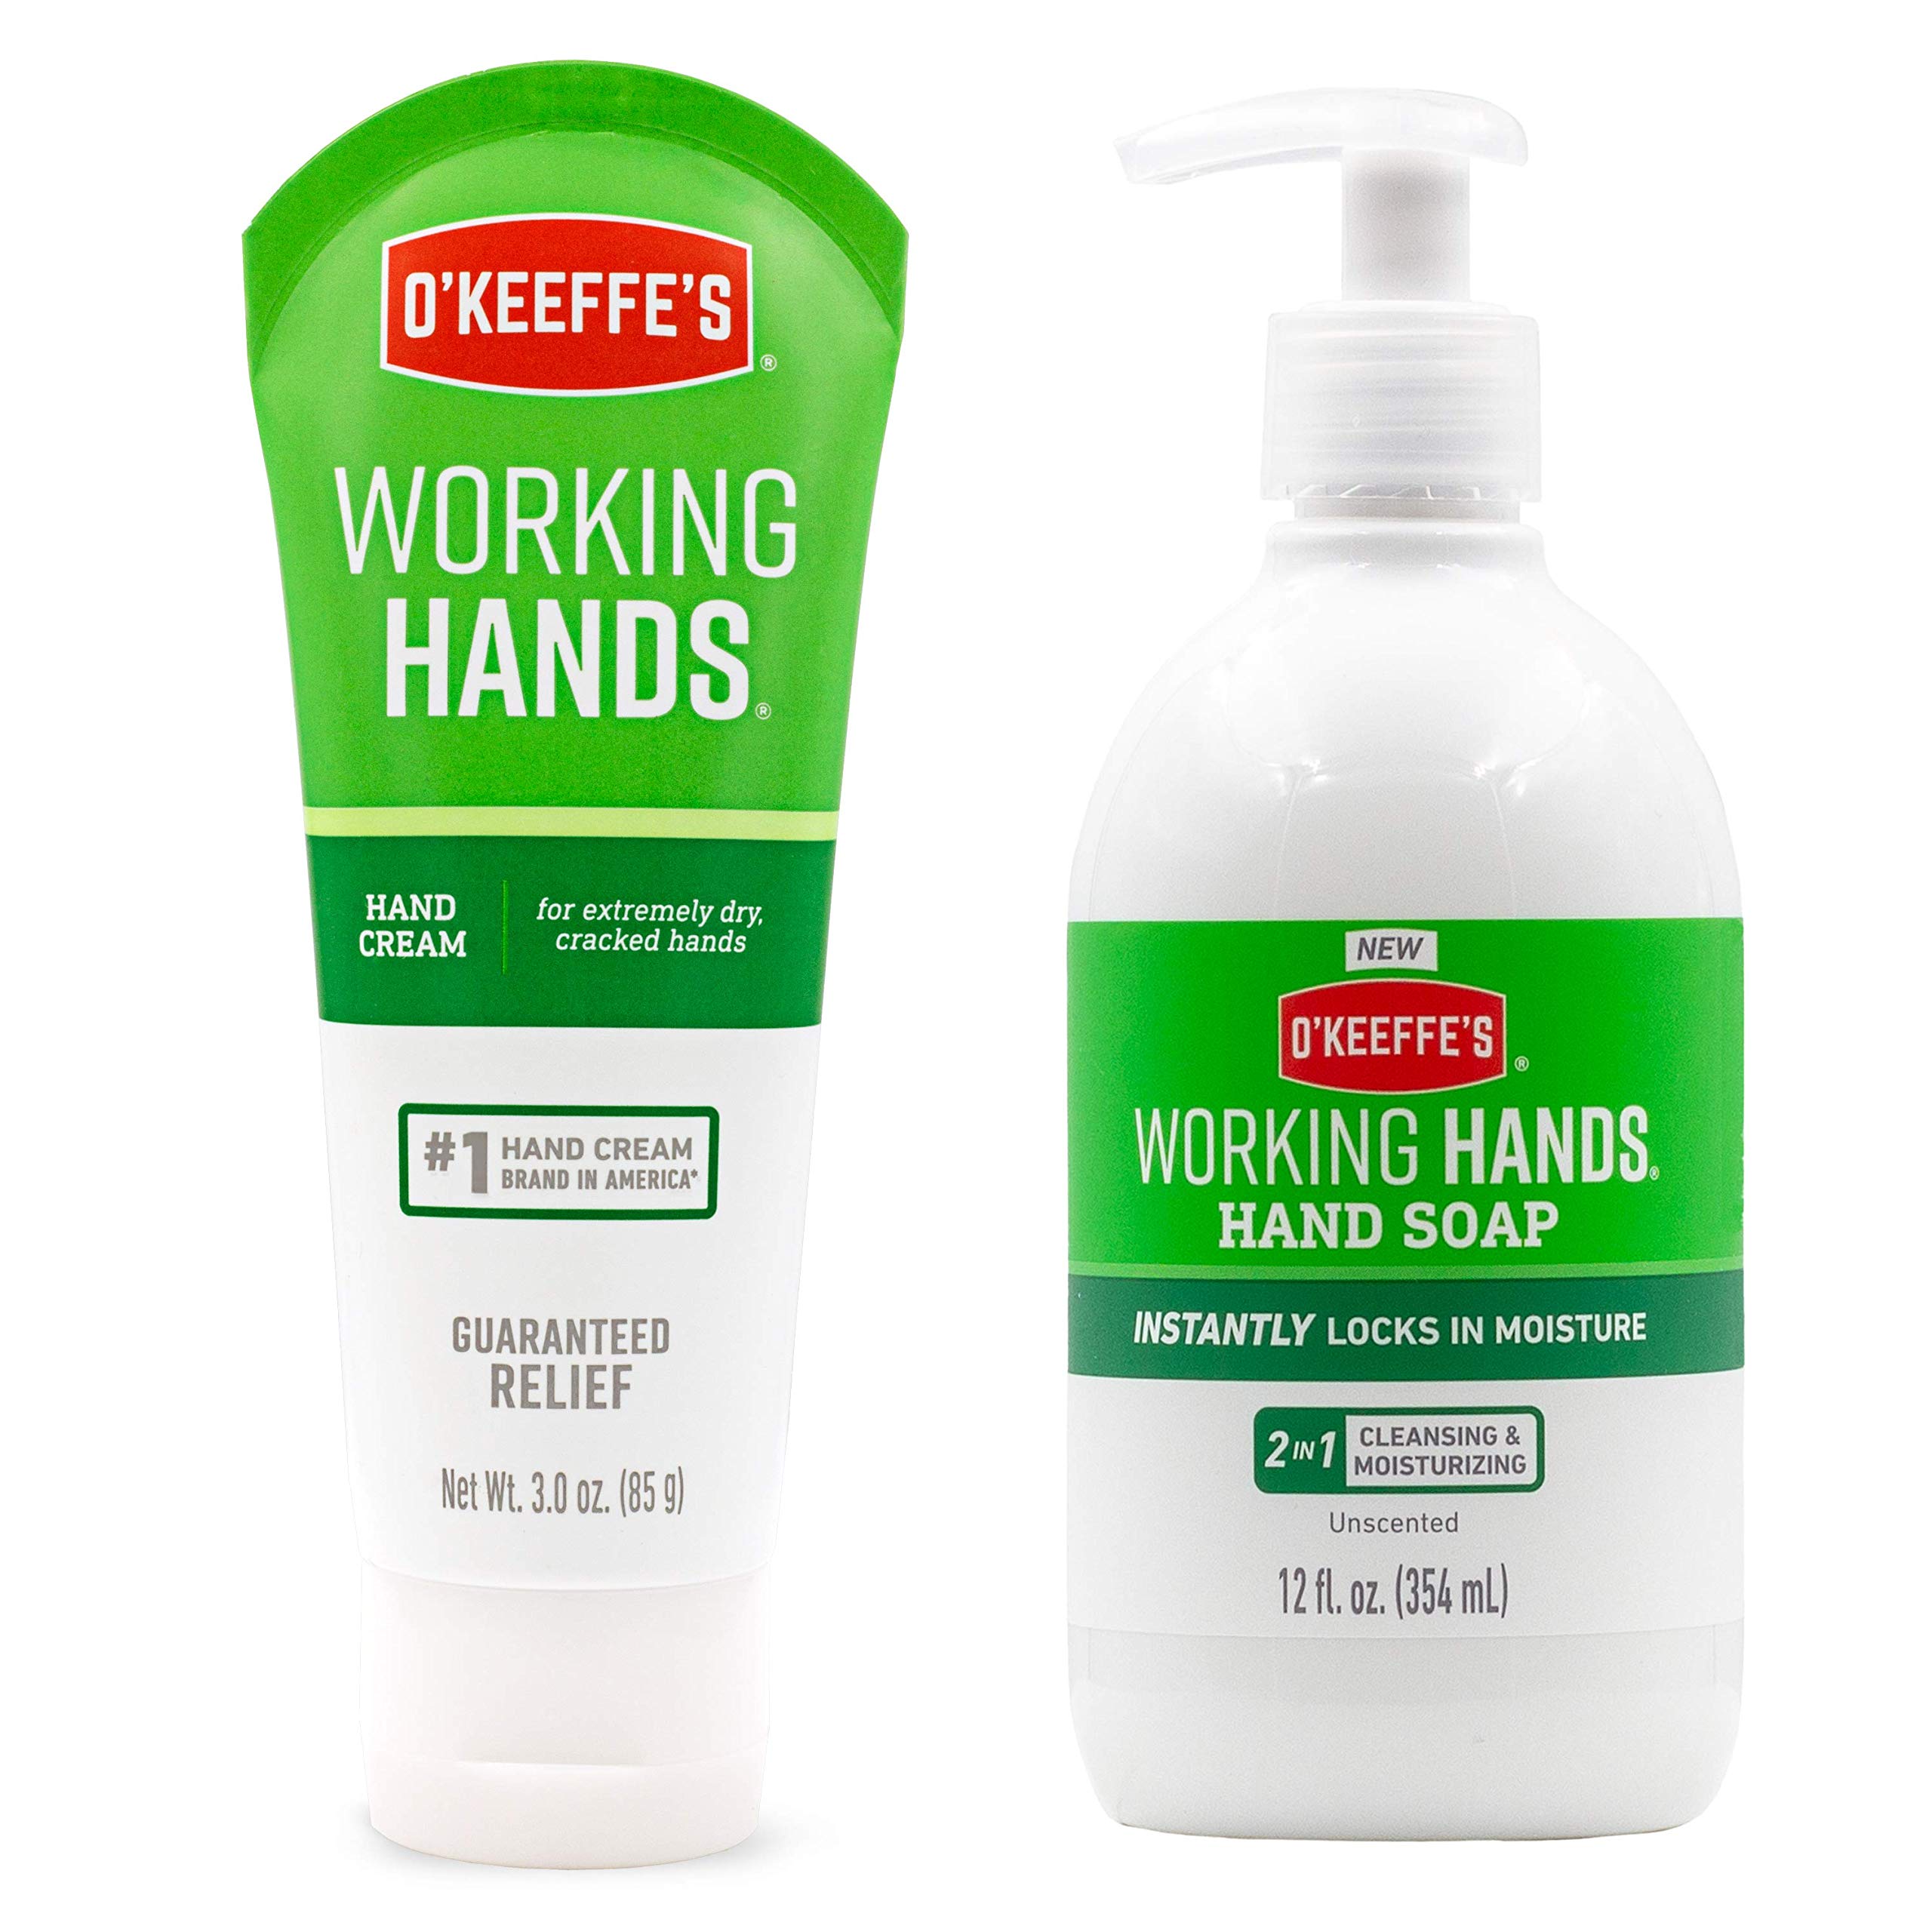 O'Keeffe's Working Hands Hand Cream, 3.4 ounce Jar, (Pack of 9)